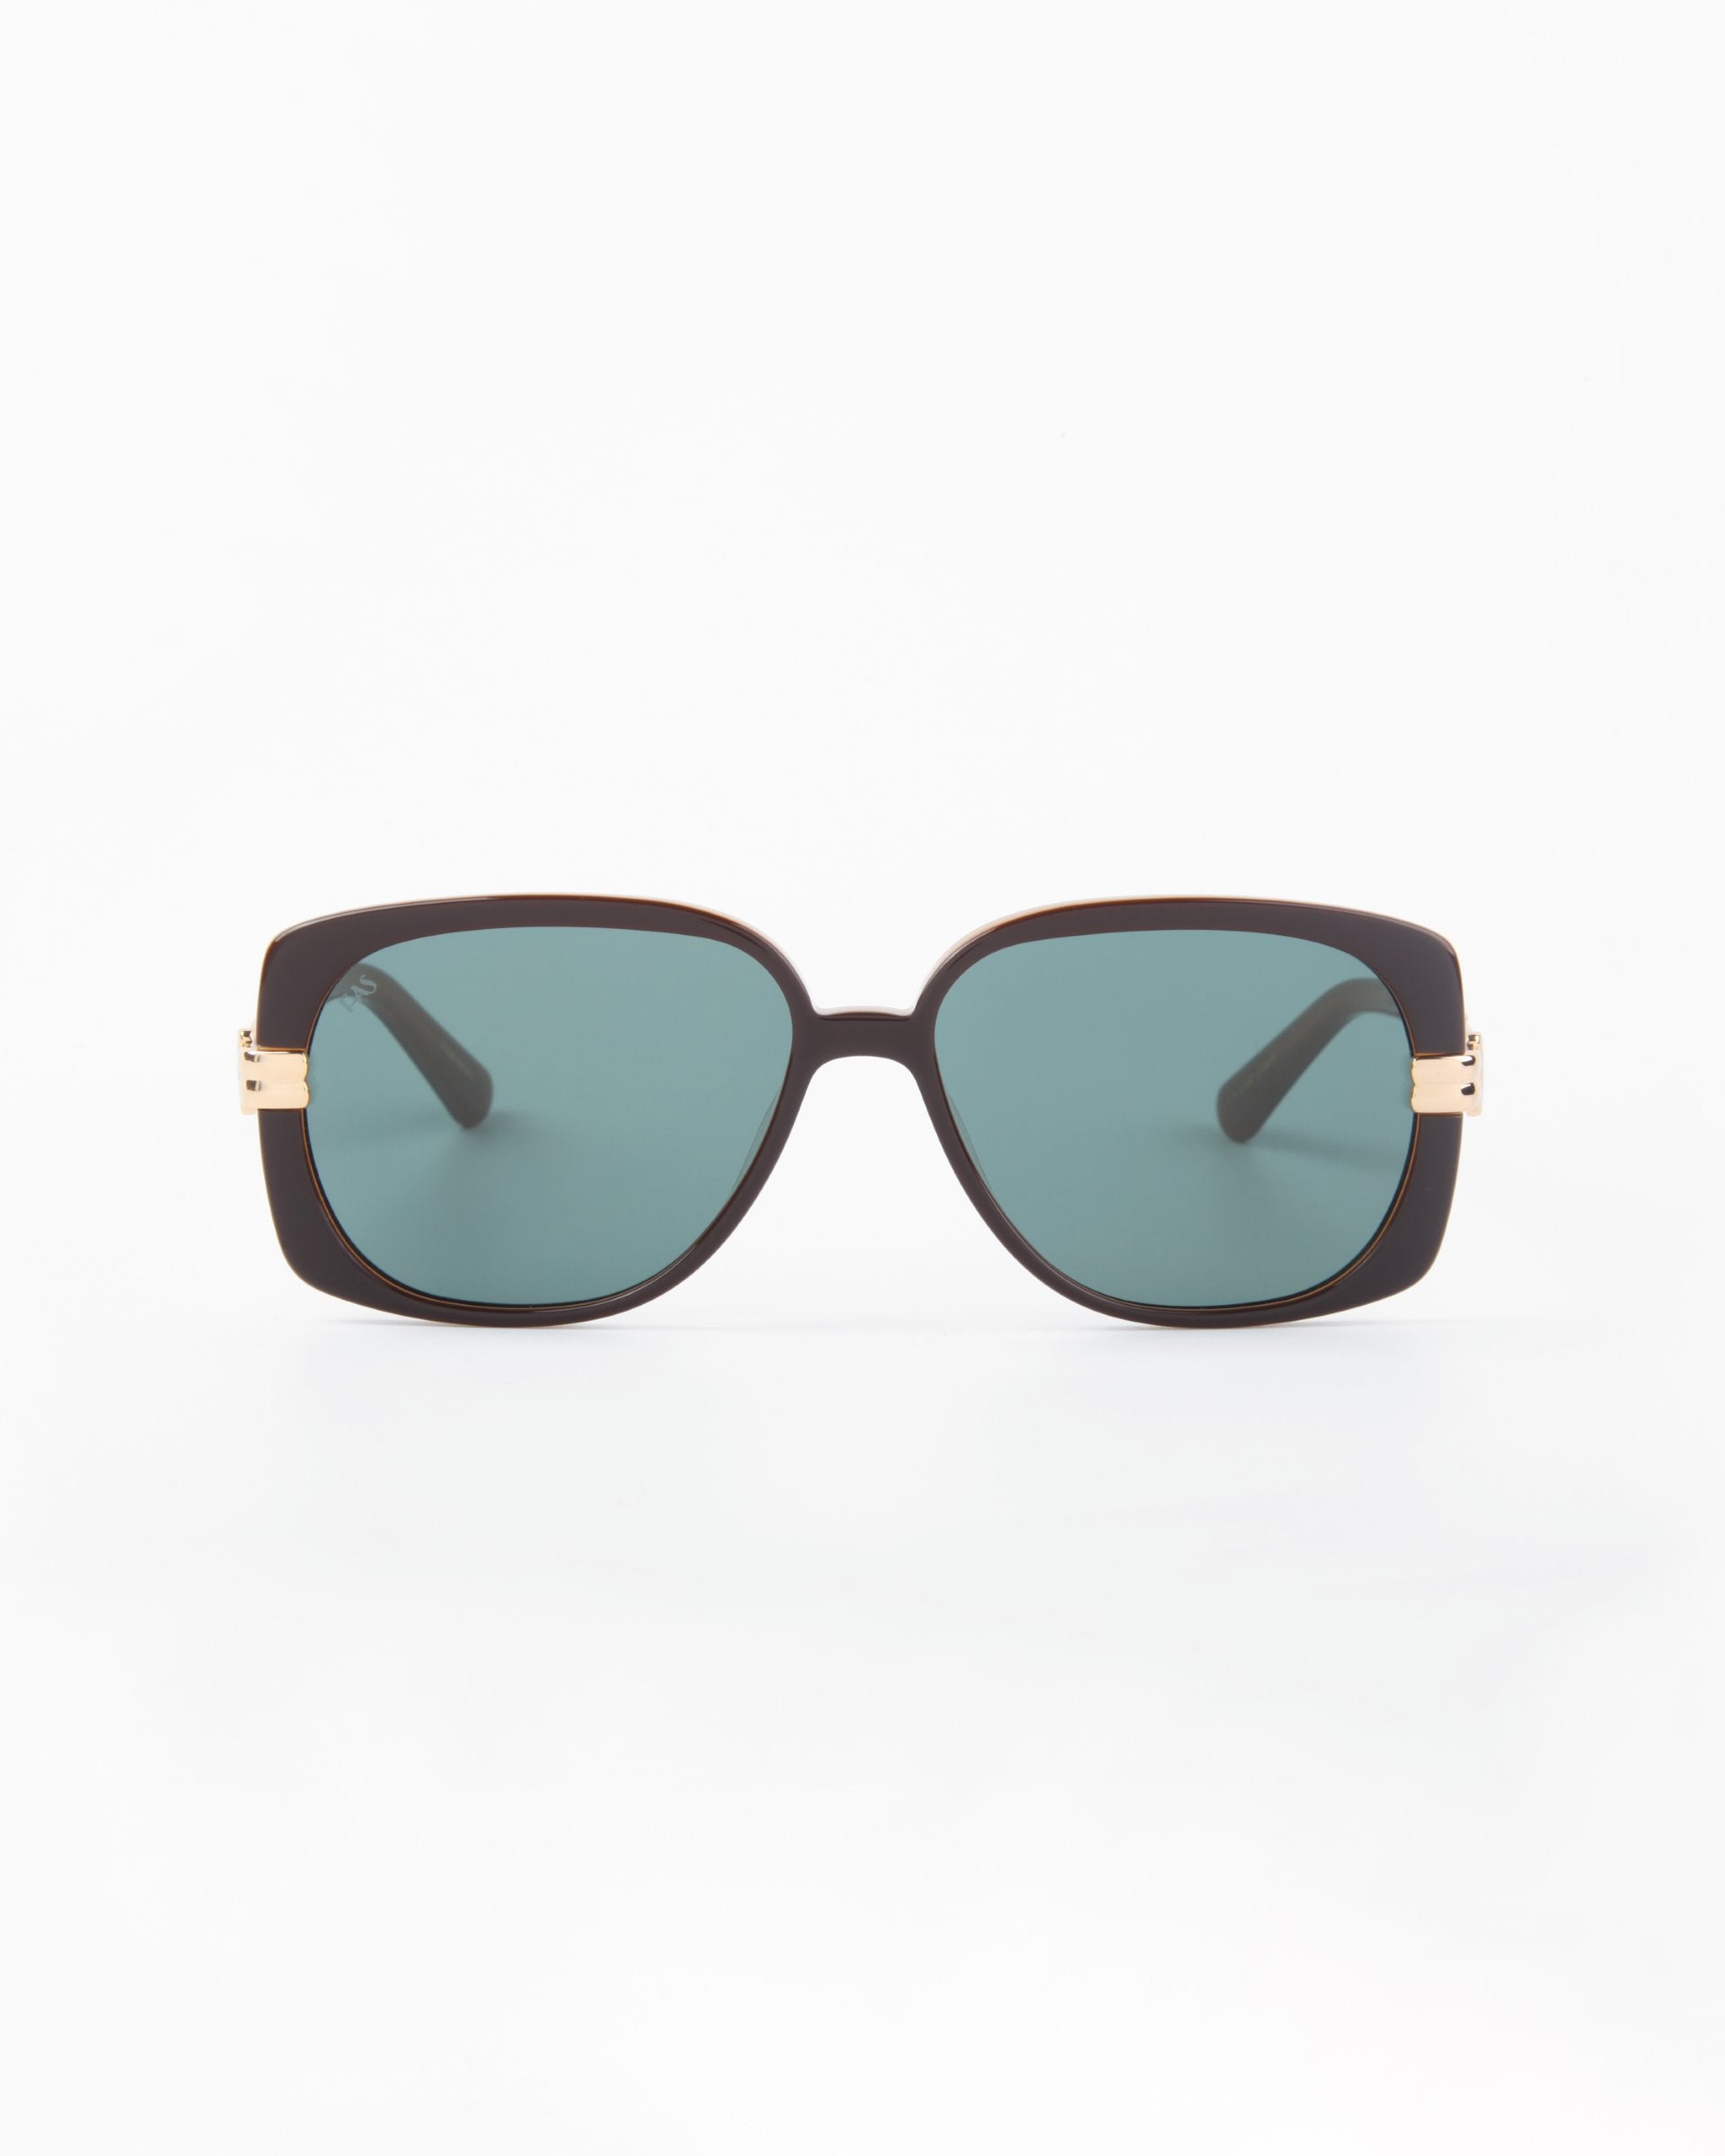 A pair of large, fashionable For Art&#39;s Sake® Icon sunglasses with dark rectangular frames, green-tinted shatter resistant nylon lenses, and gold accents on the temples. Handmade with UVA &amp; UVB-protection, the arms of the sunglasses extend directly back from the hinges against a plain white background.